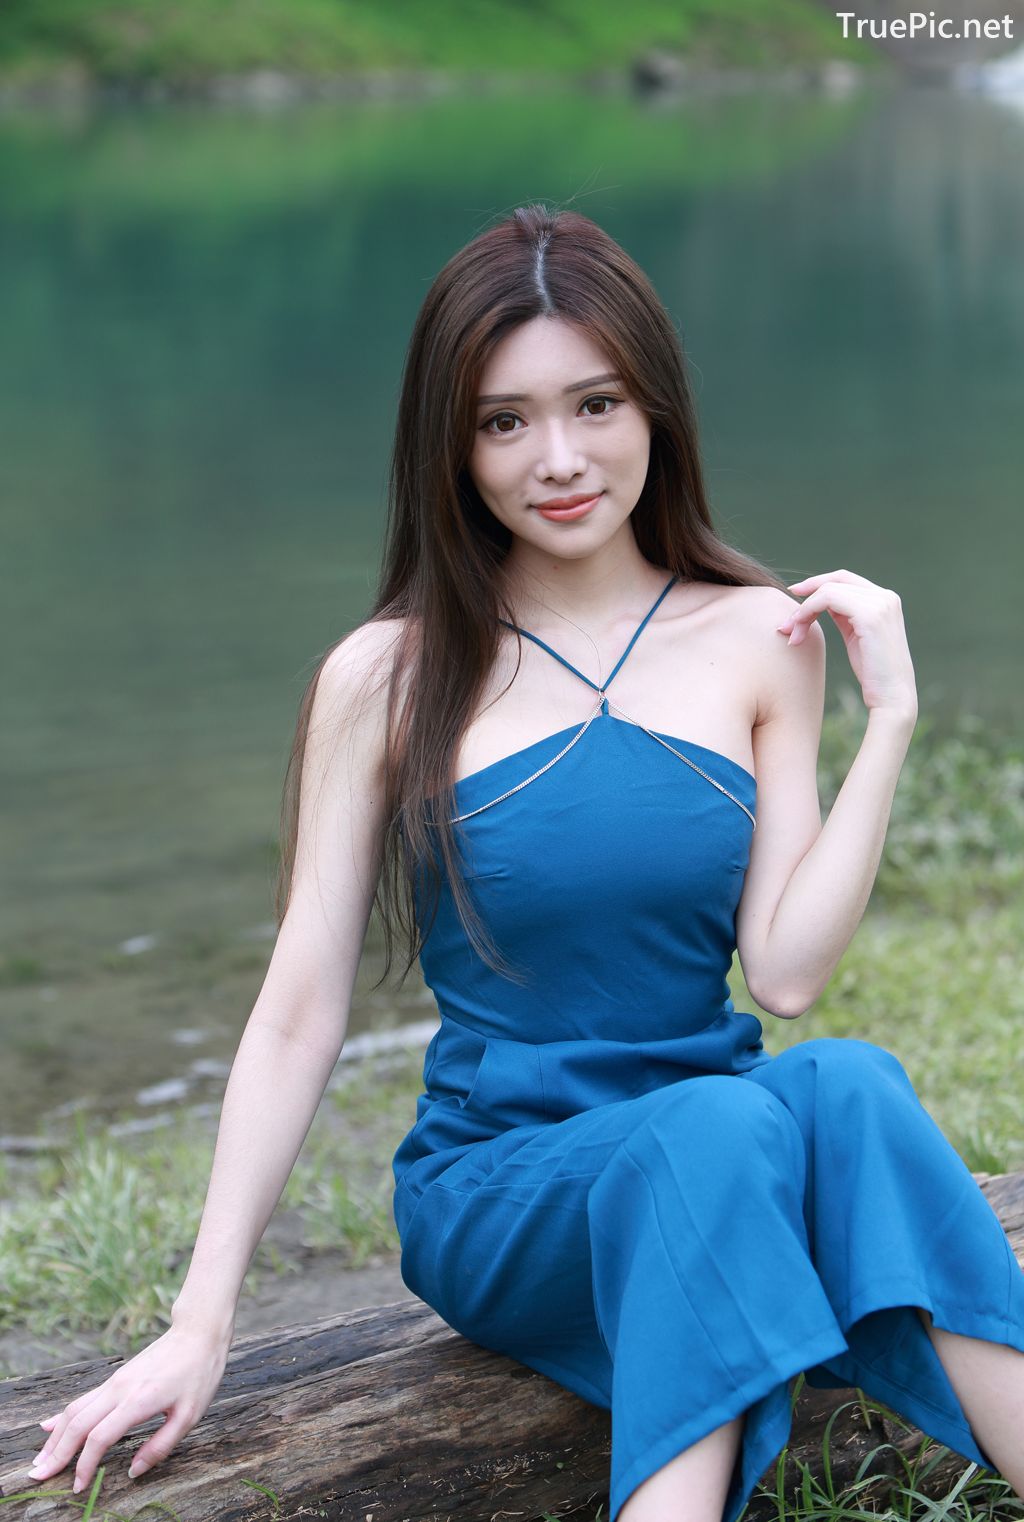 Image-Taiwanese-Pure-Girl-承容-Young-Beautiful-And-Lovely-TruePic.net- Picture-76